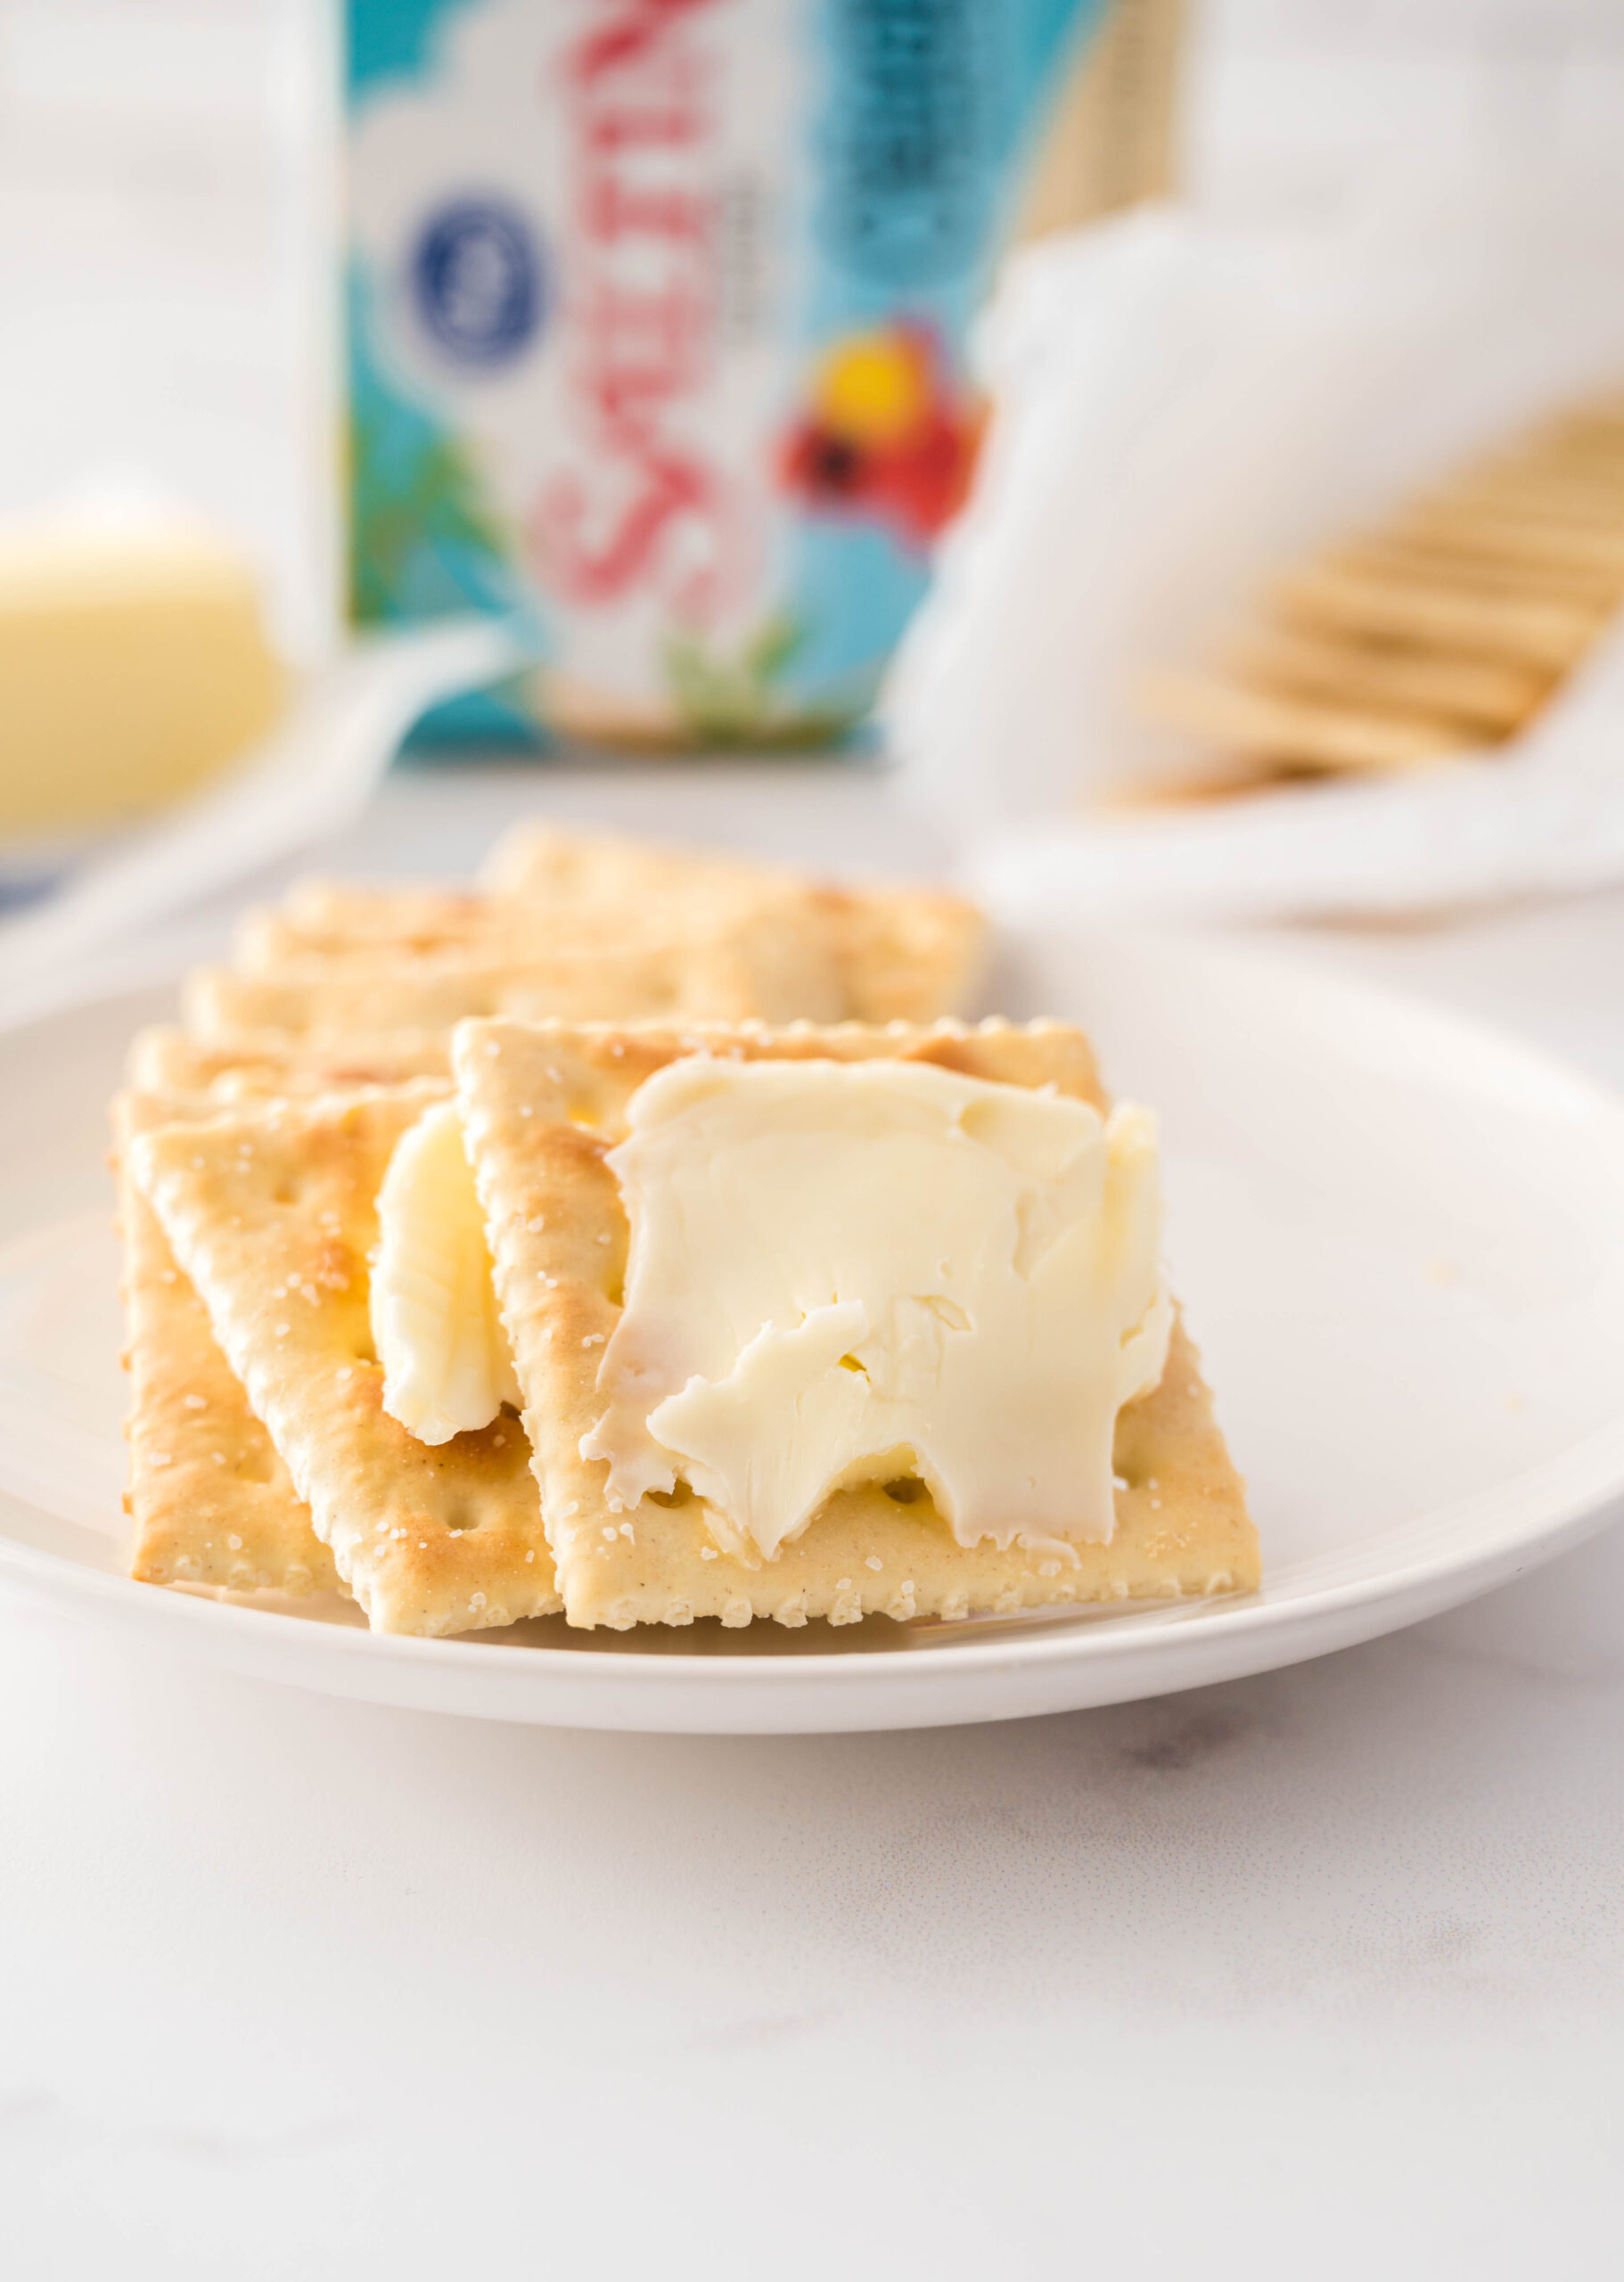 ‘Buttered Saltine Crackers’ Are The Hot New Snack Trend Everyone Is ...